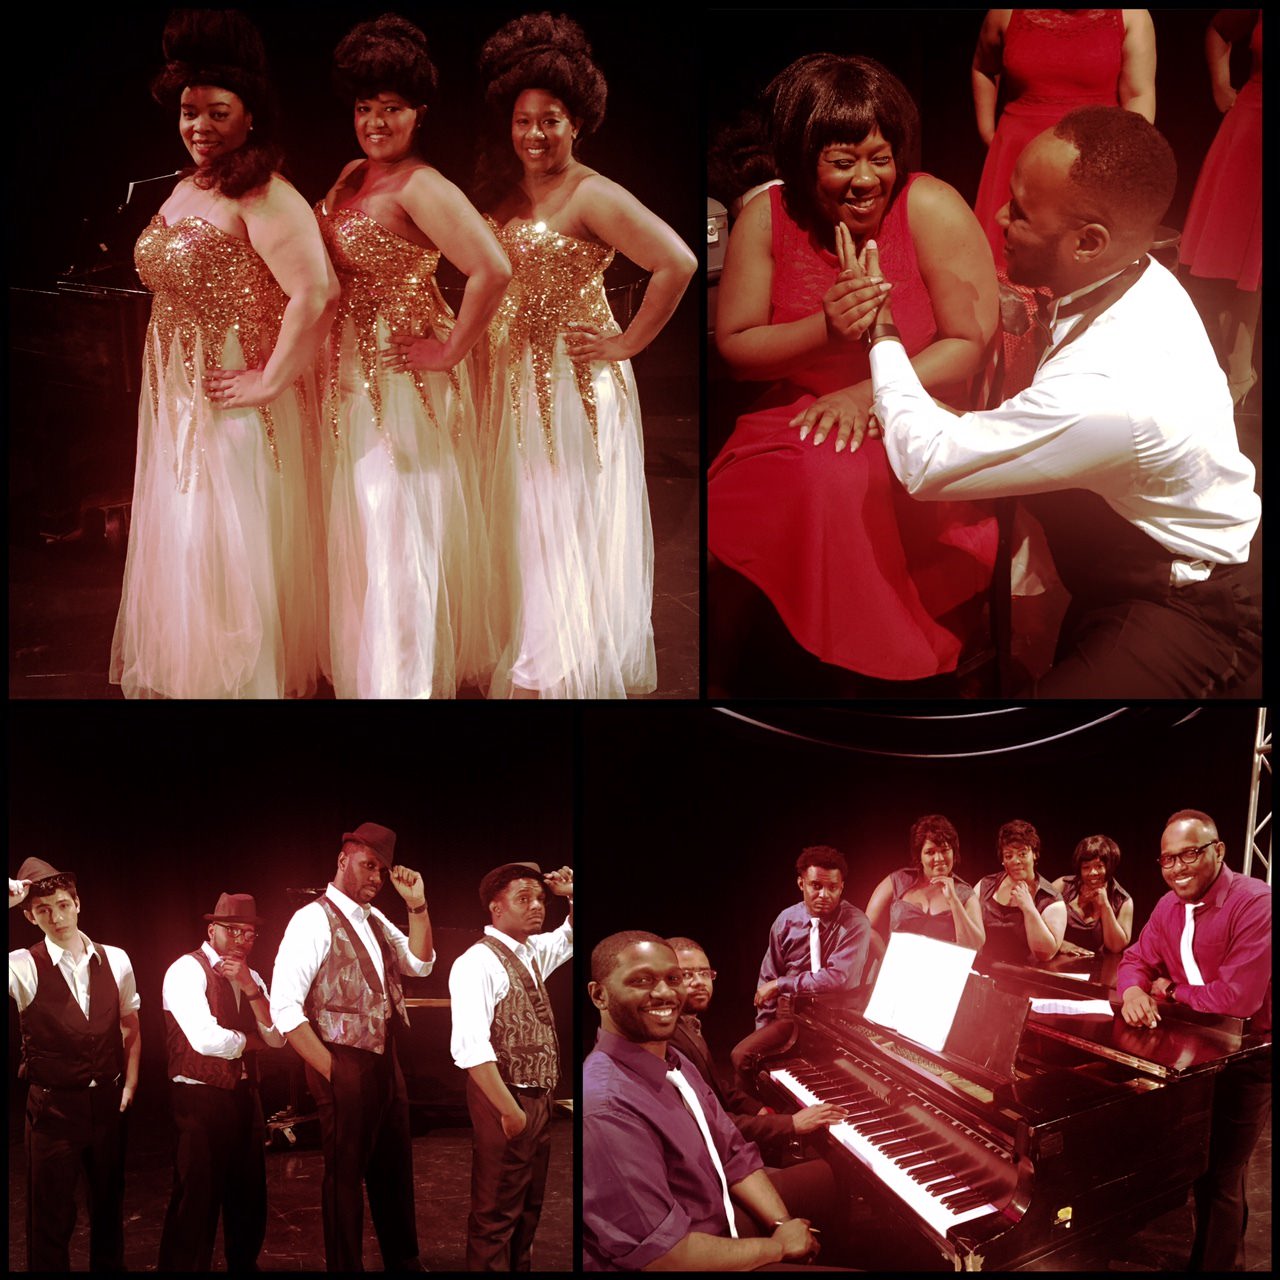 Dreamgirls Presented by Tantallon Community Players
May 27 - June 12, 2016
tantallonplayers.org
Photo by Kandace Foreman 1